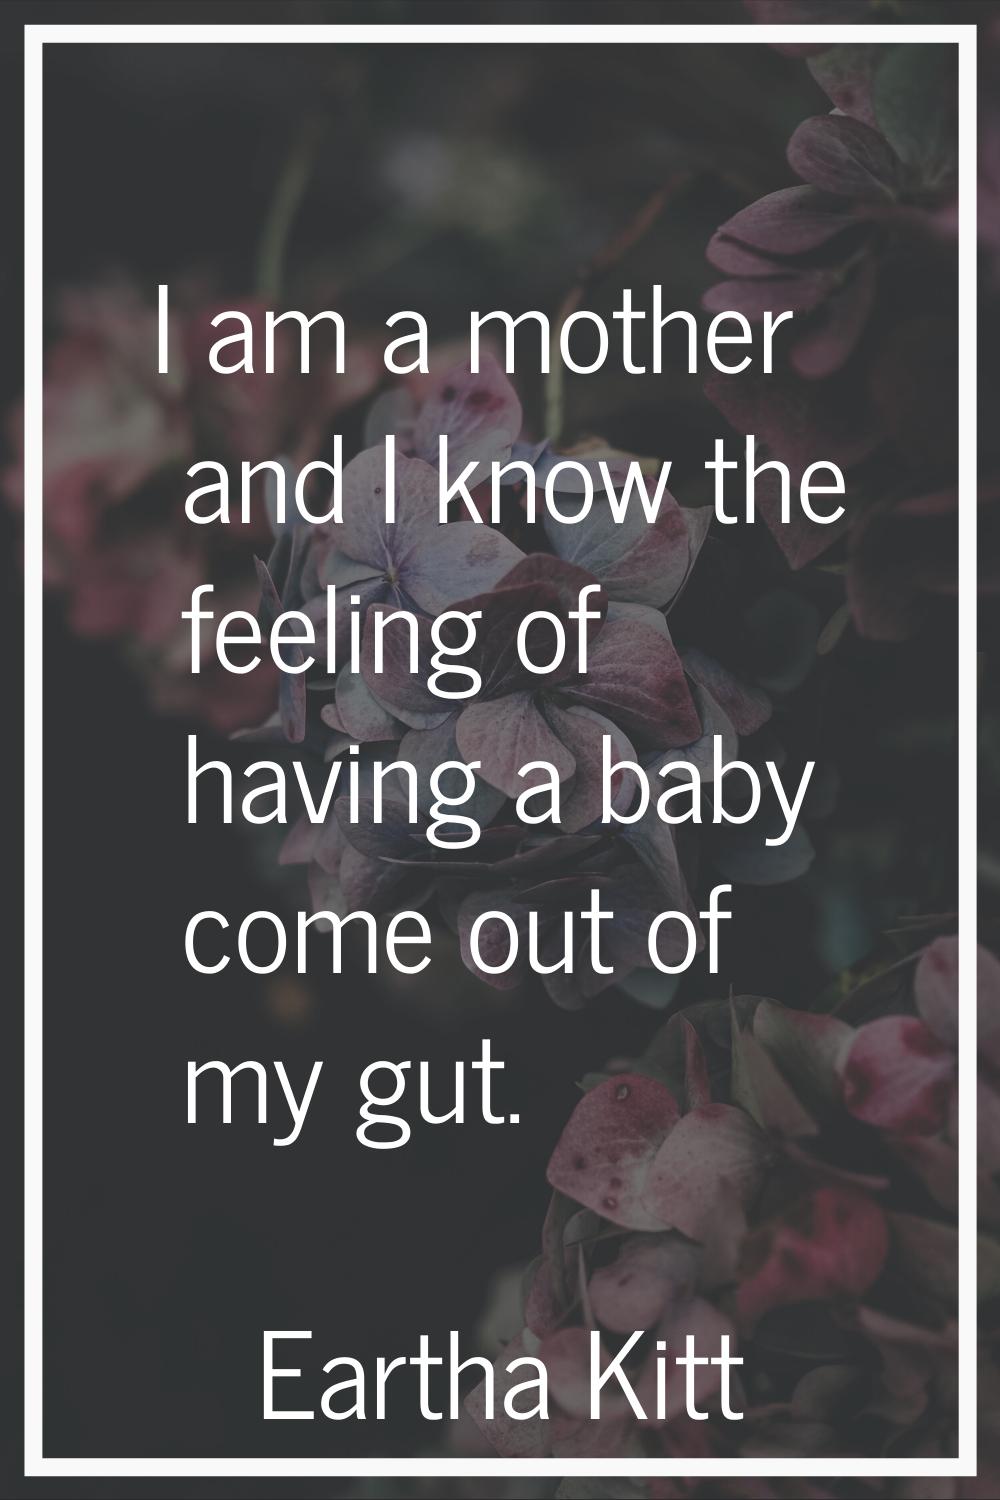 I am a mother and I know the feeling of having a baby come out of my gut.